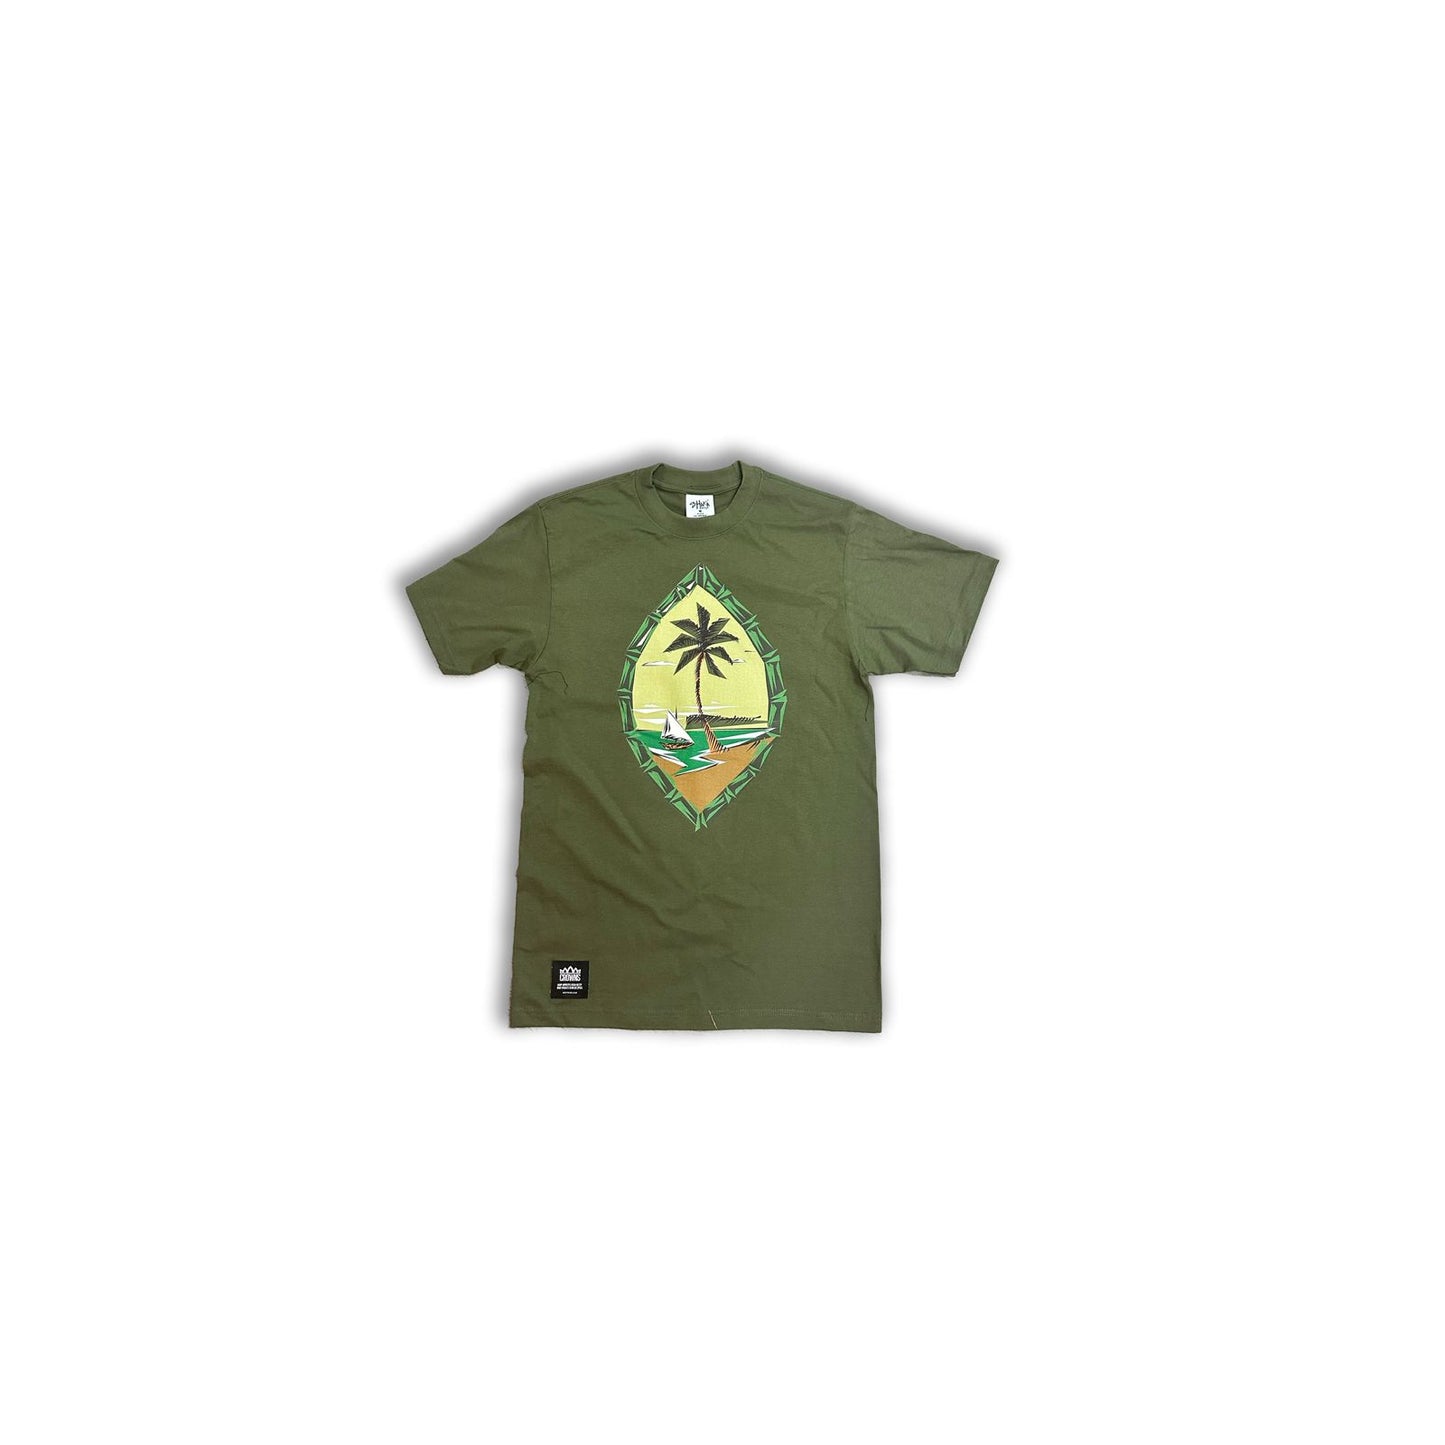 Naturel Seal Tee in Olive